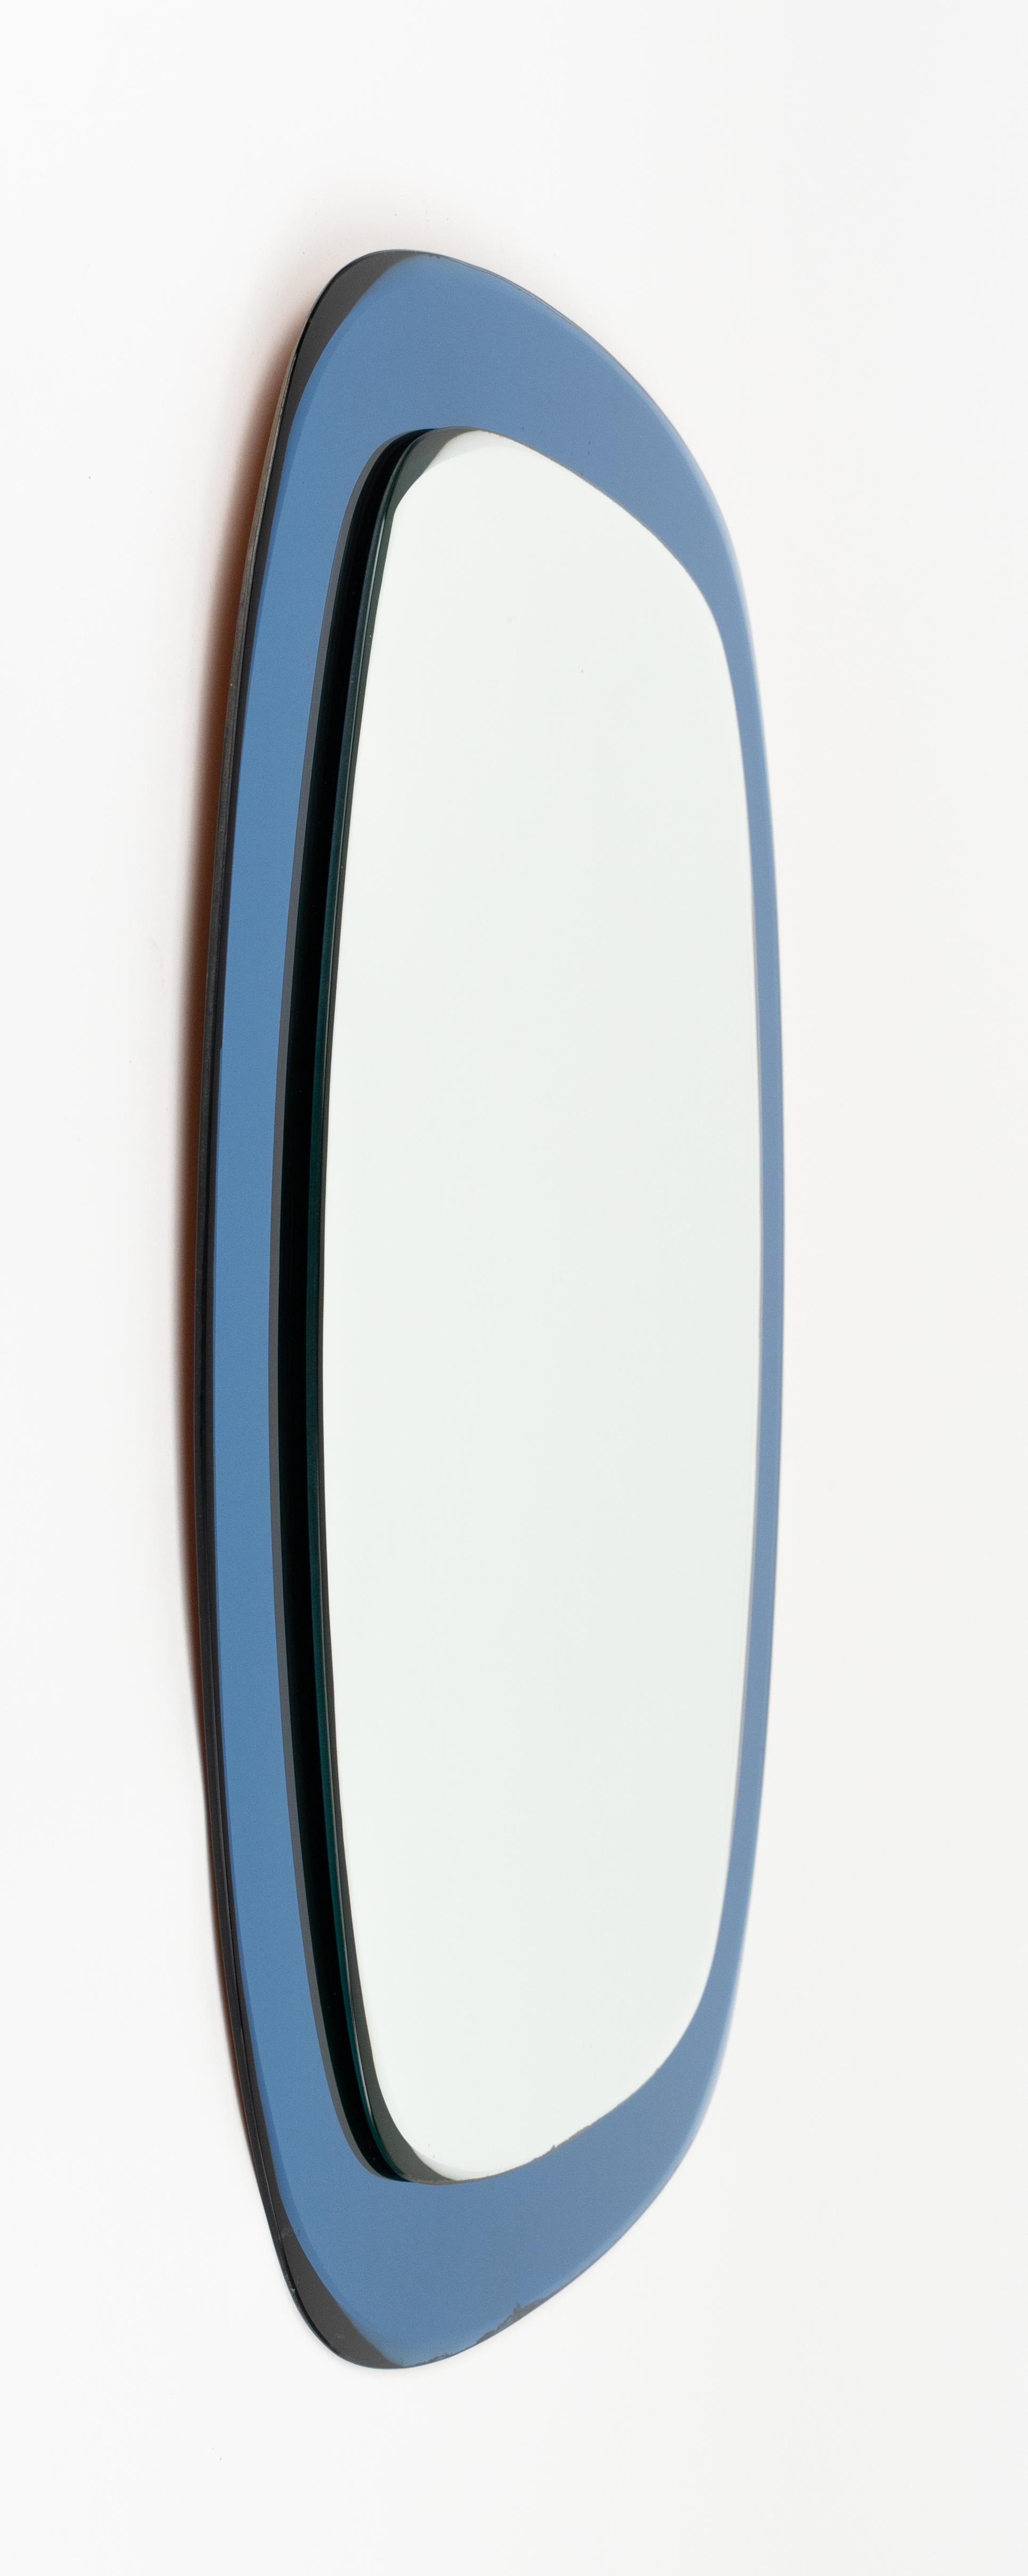 Midcentury Cristal Art Oval Wall Mirror with Blue Frame, Italy 1960s In Good Condition For Sale In Rome, IT